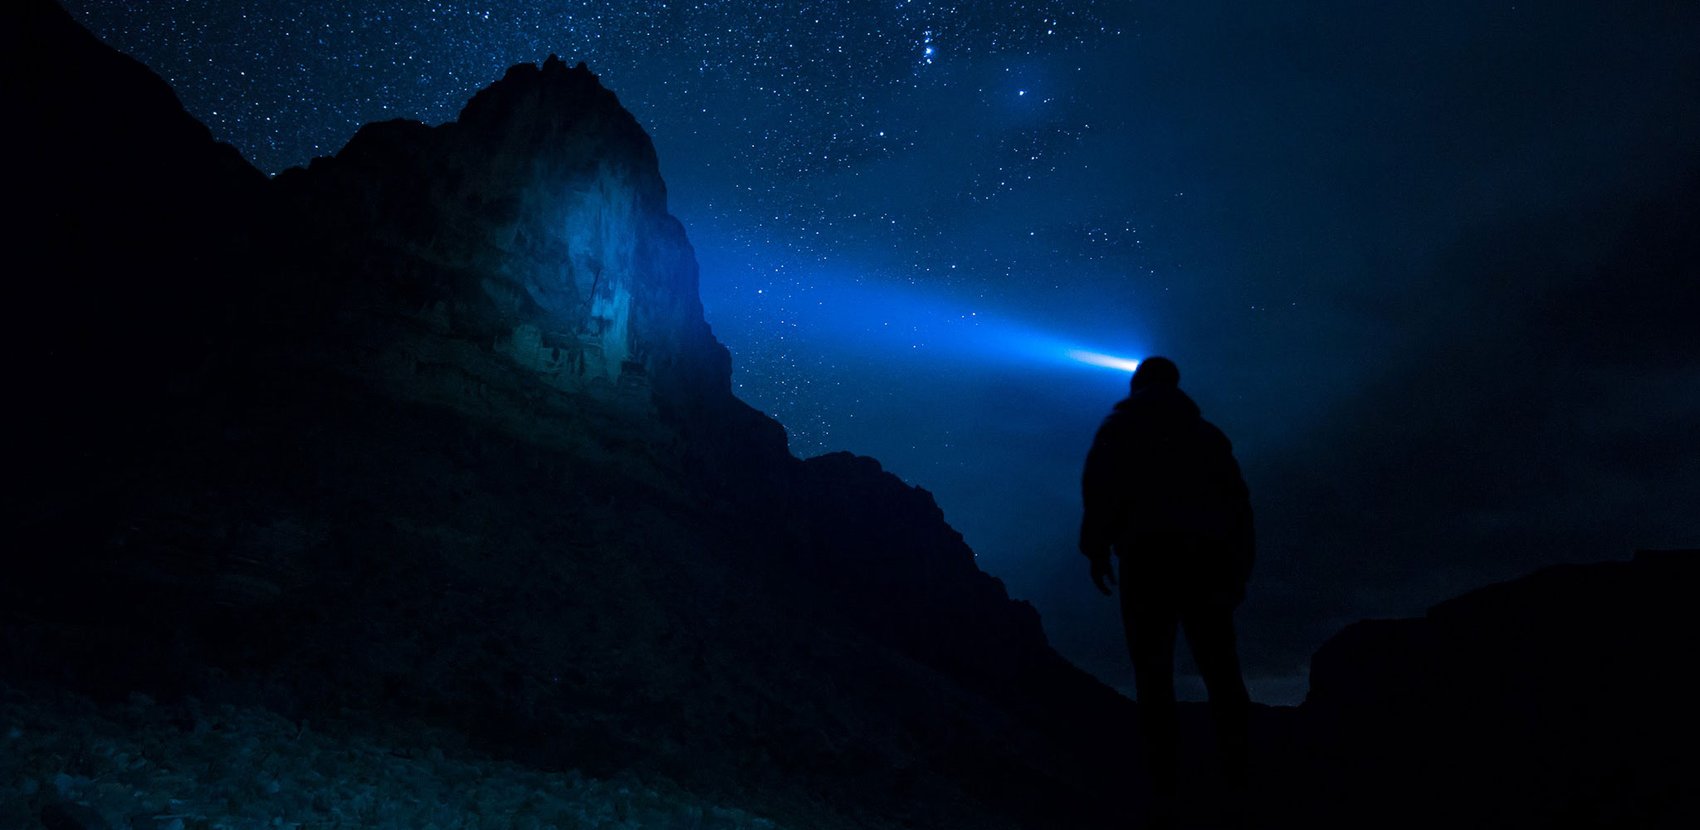 A person standing on a mountain with a blue light shining on him.